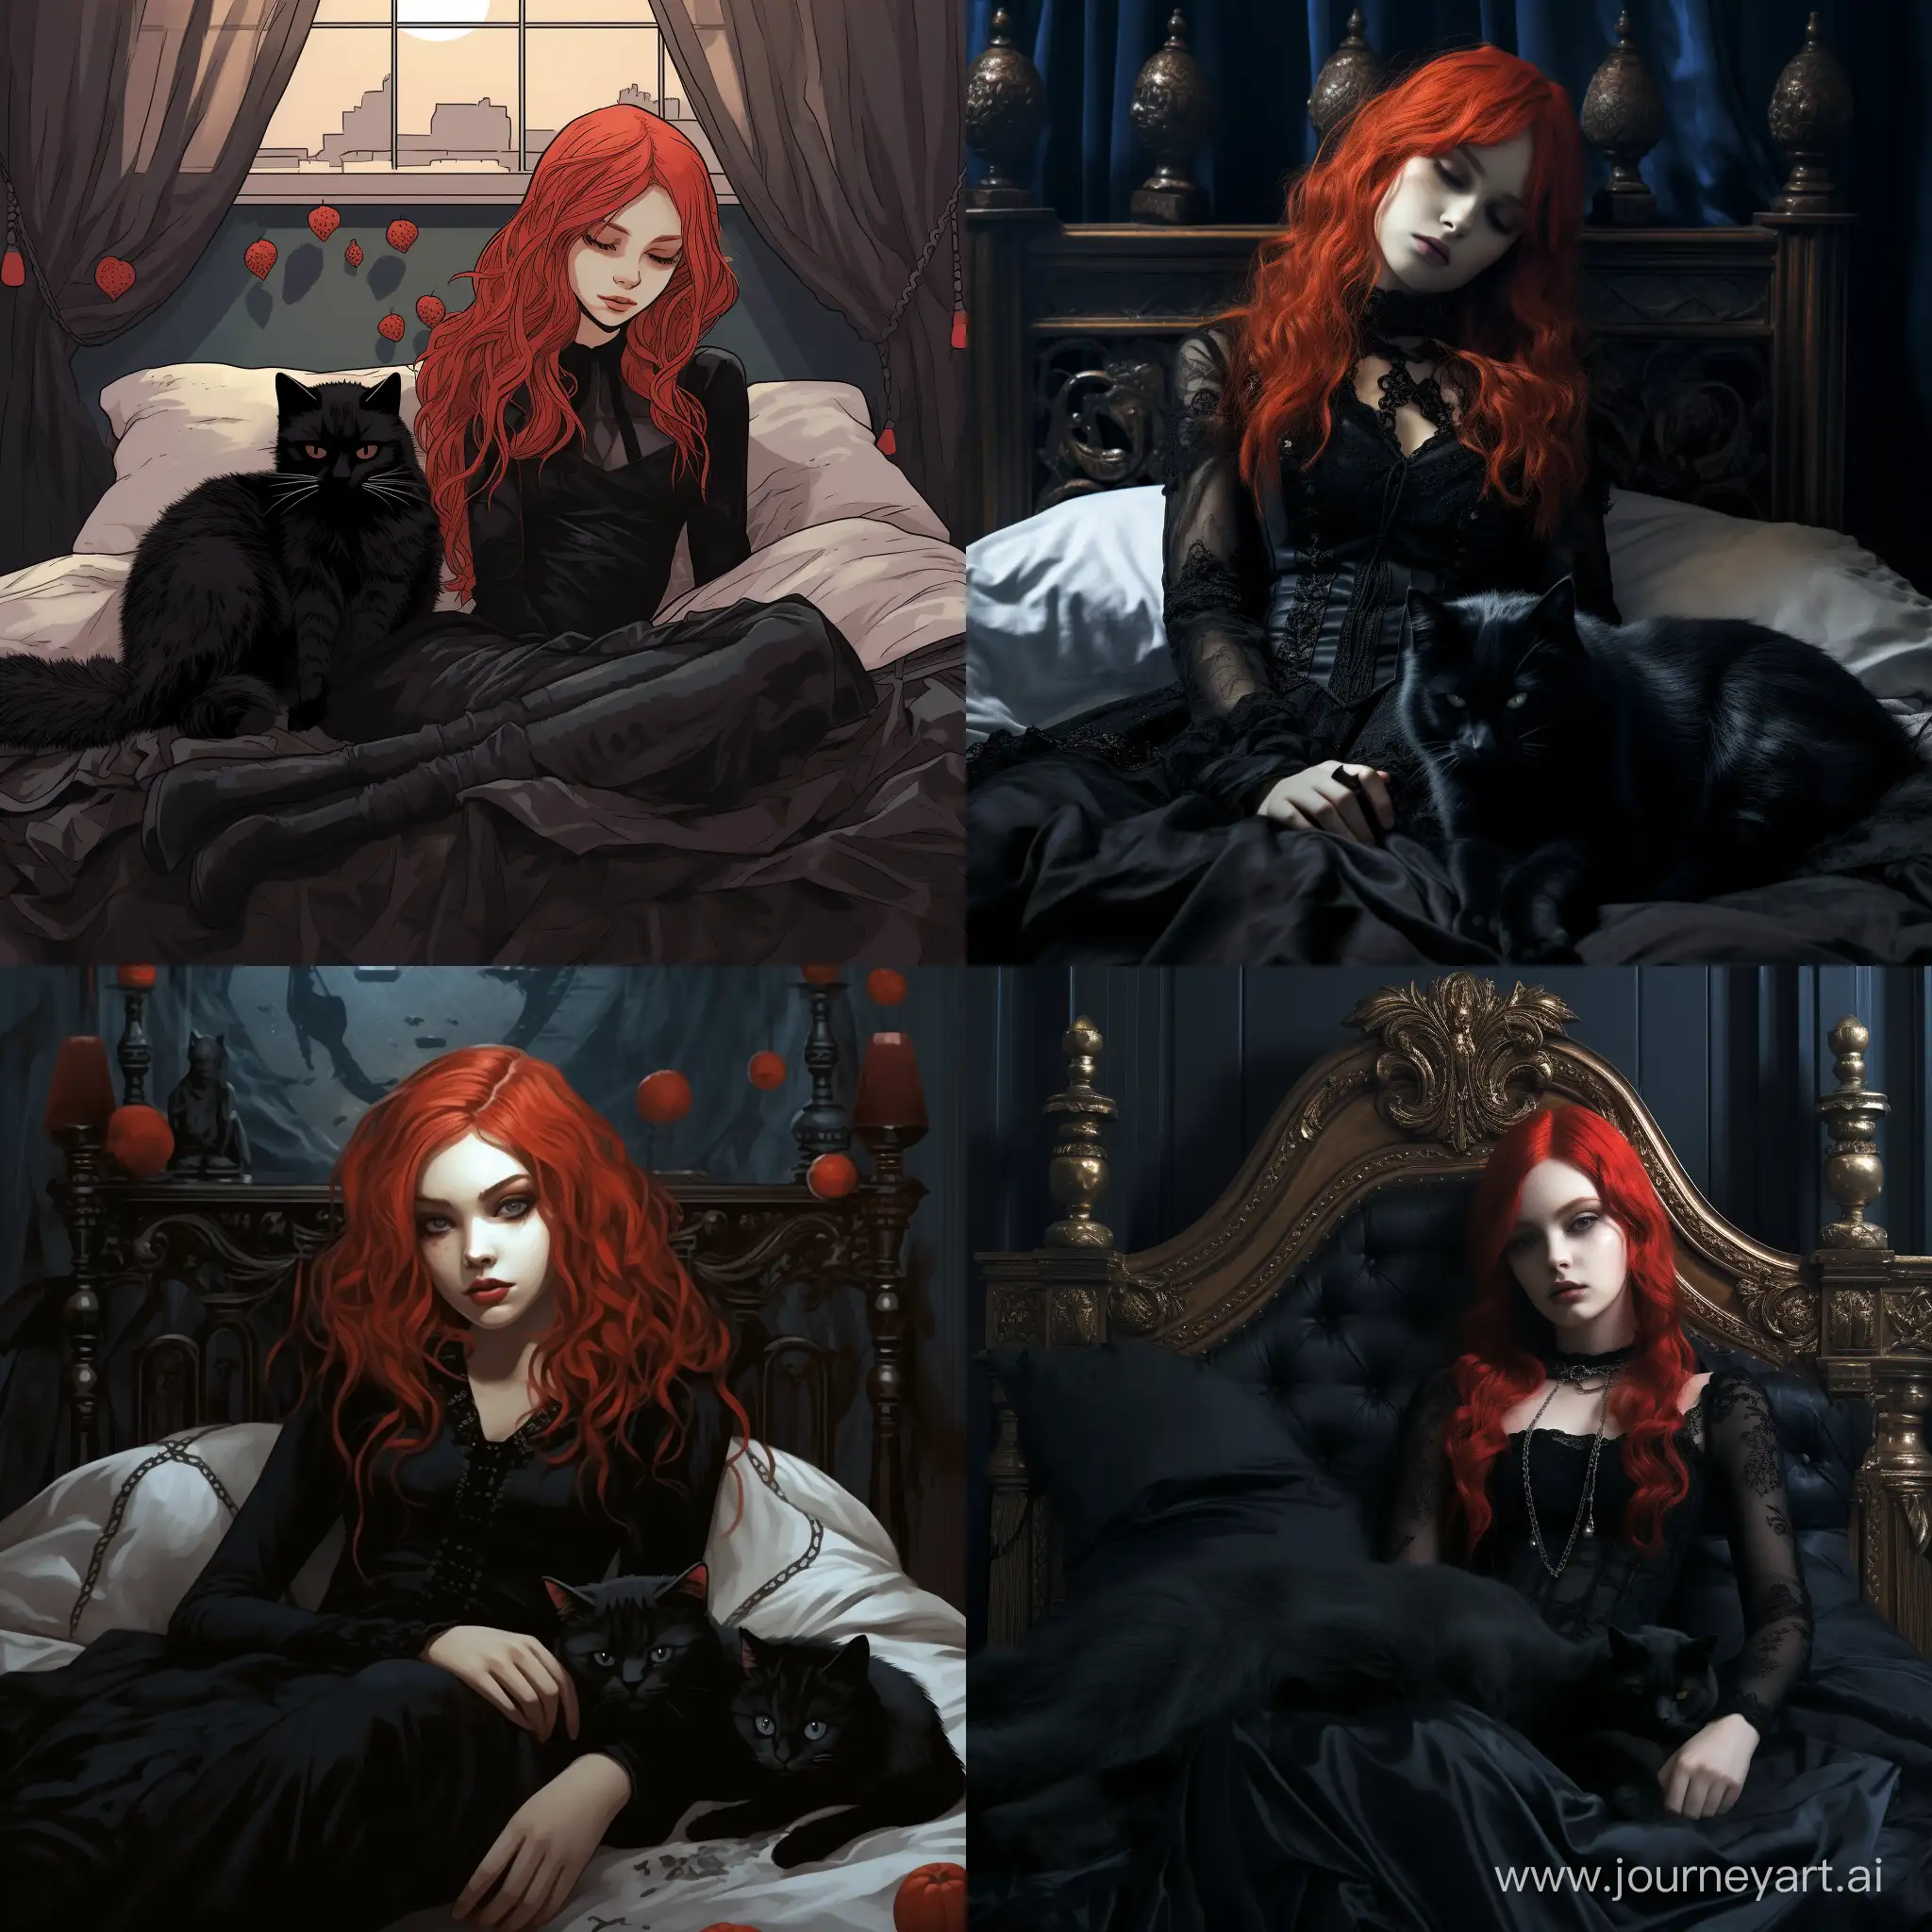 Gothic-Dreams-RedHaired-Girl-Sleeping-Beside-GothicStyle-Cat